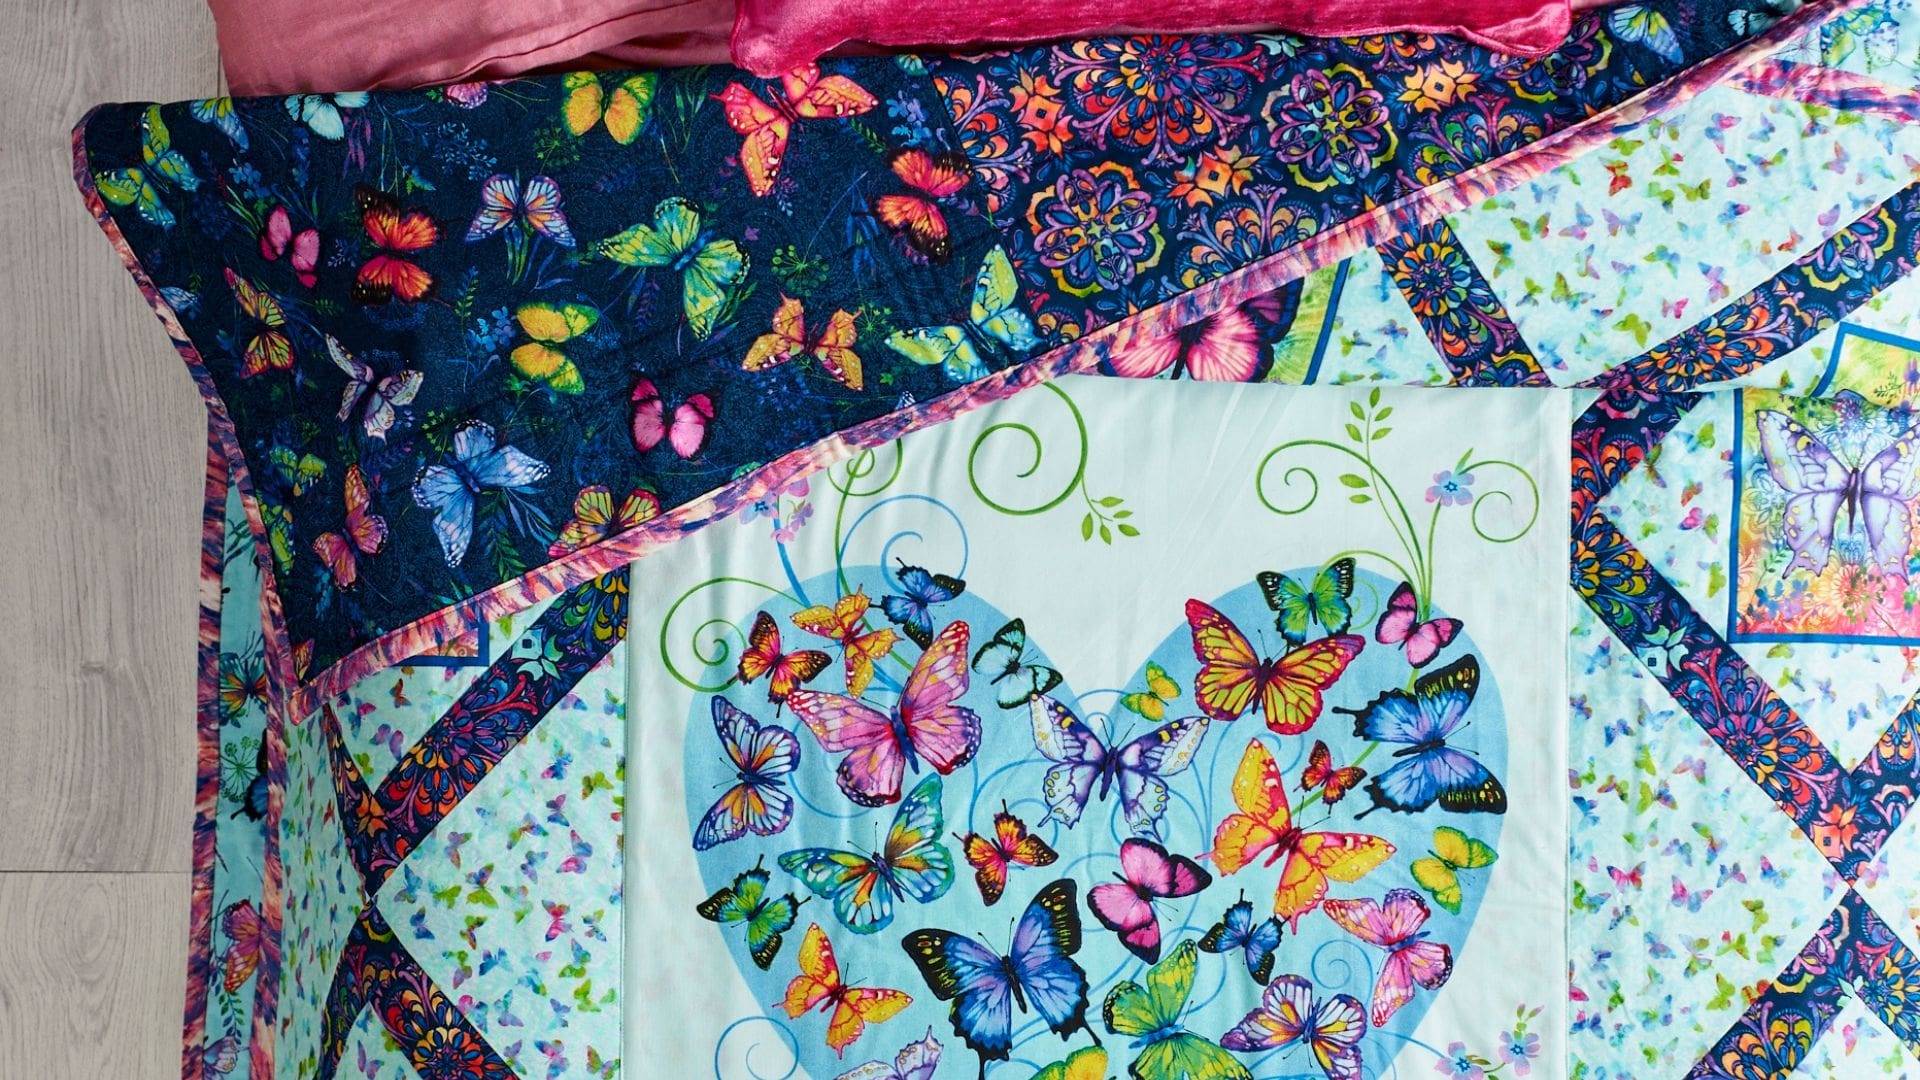 Beginner quilting project - Butterfly Paradise Quilt